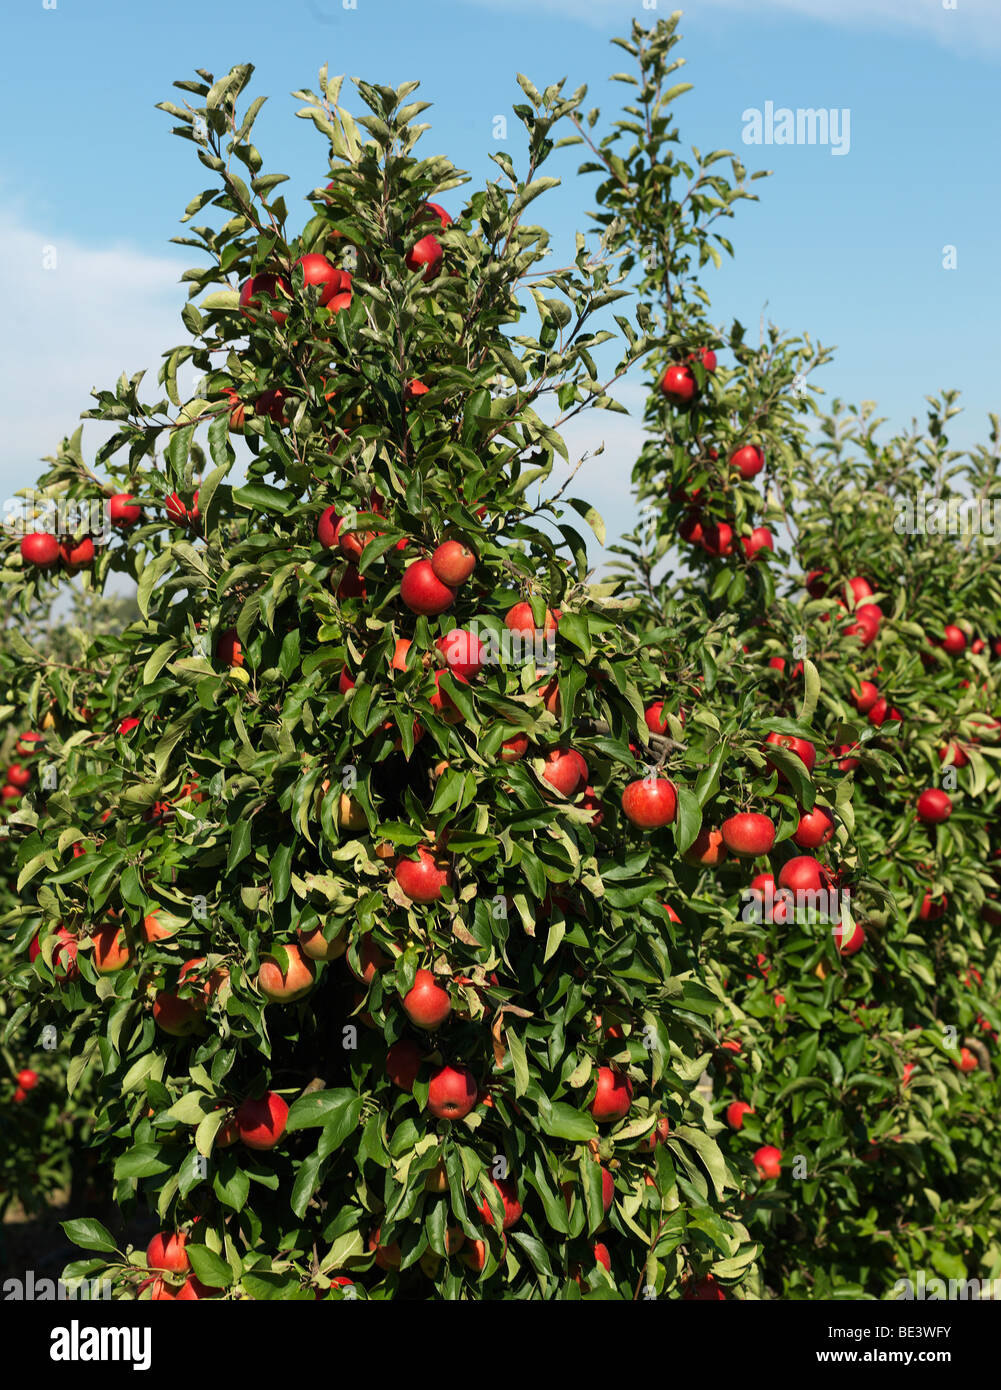 Apple trees pictured during the harvest time in the Old Land/Jork, Lower Saxony, Germany September 16, 2009 Stock Photo